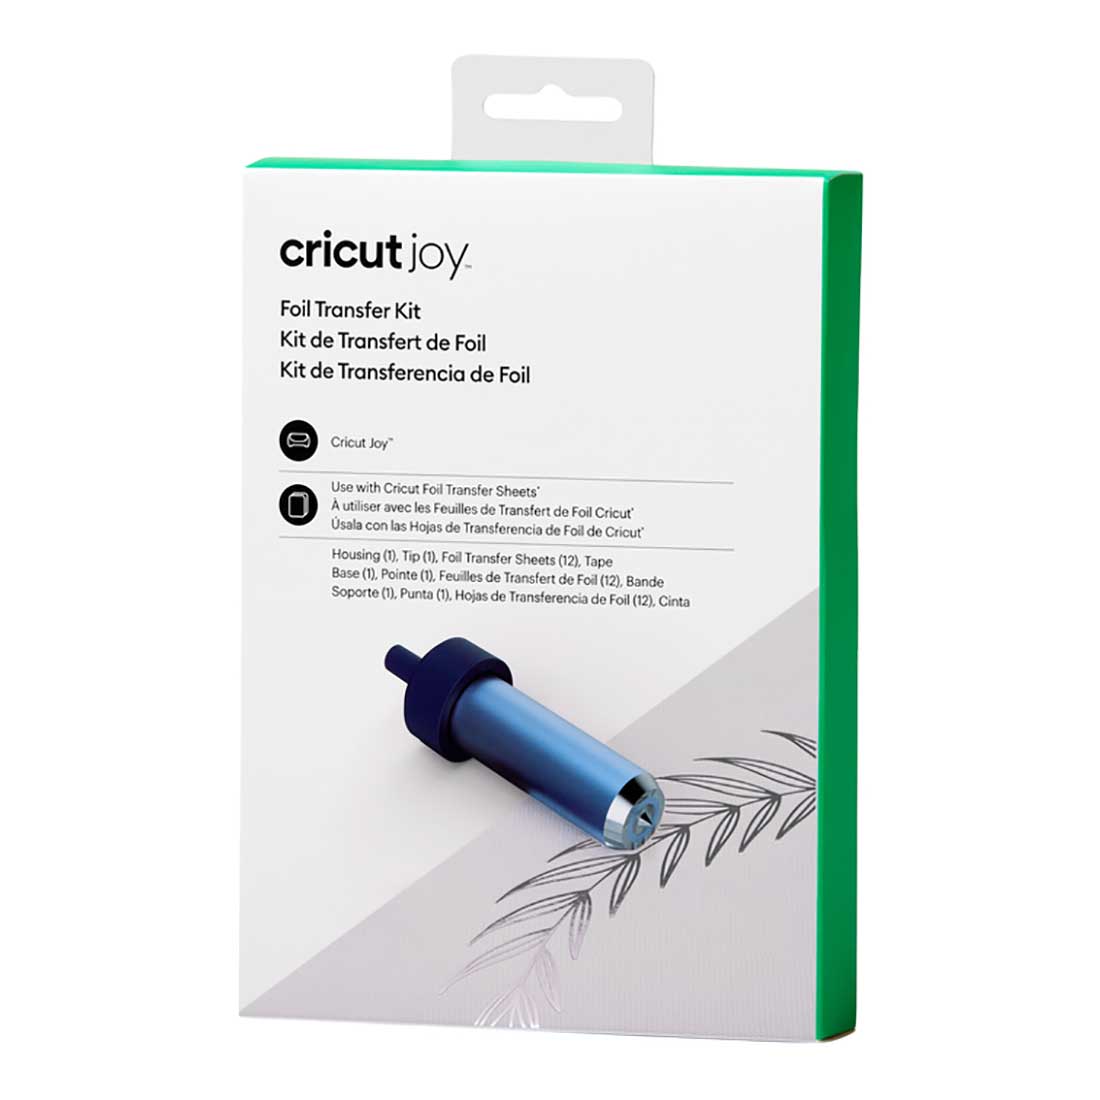 Cricut Foil Transfer Kit, Includes 12 Foil Transfer Sheets, 3 Cricut Tools  in 1 with Interchangeable Tips (Fine, Medium & Bold), Tool Housing &  Adhesive Tape, For Cricut Maker & Explore Machines